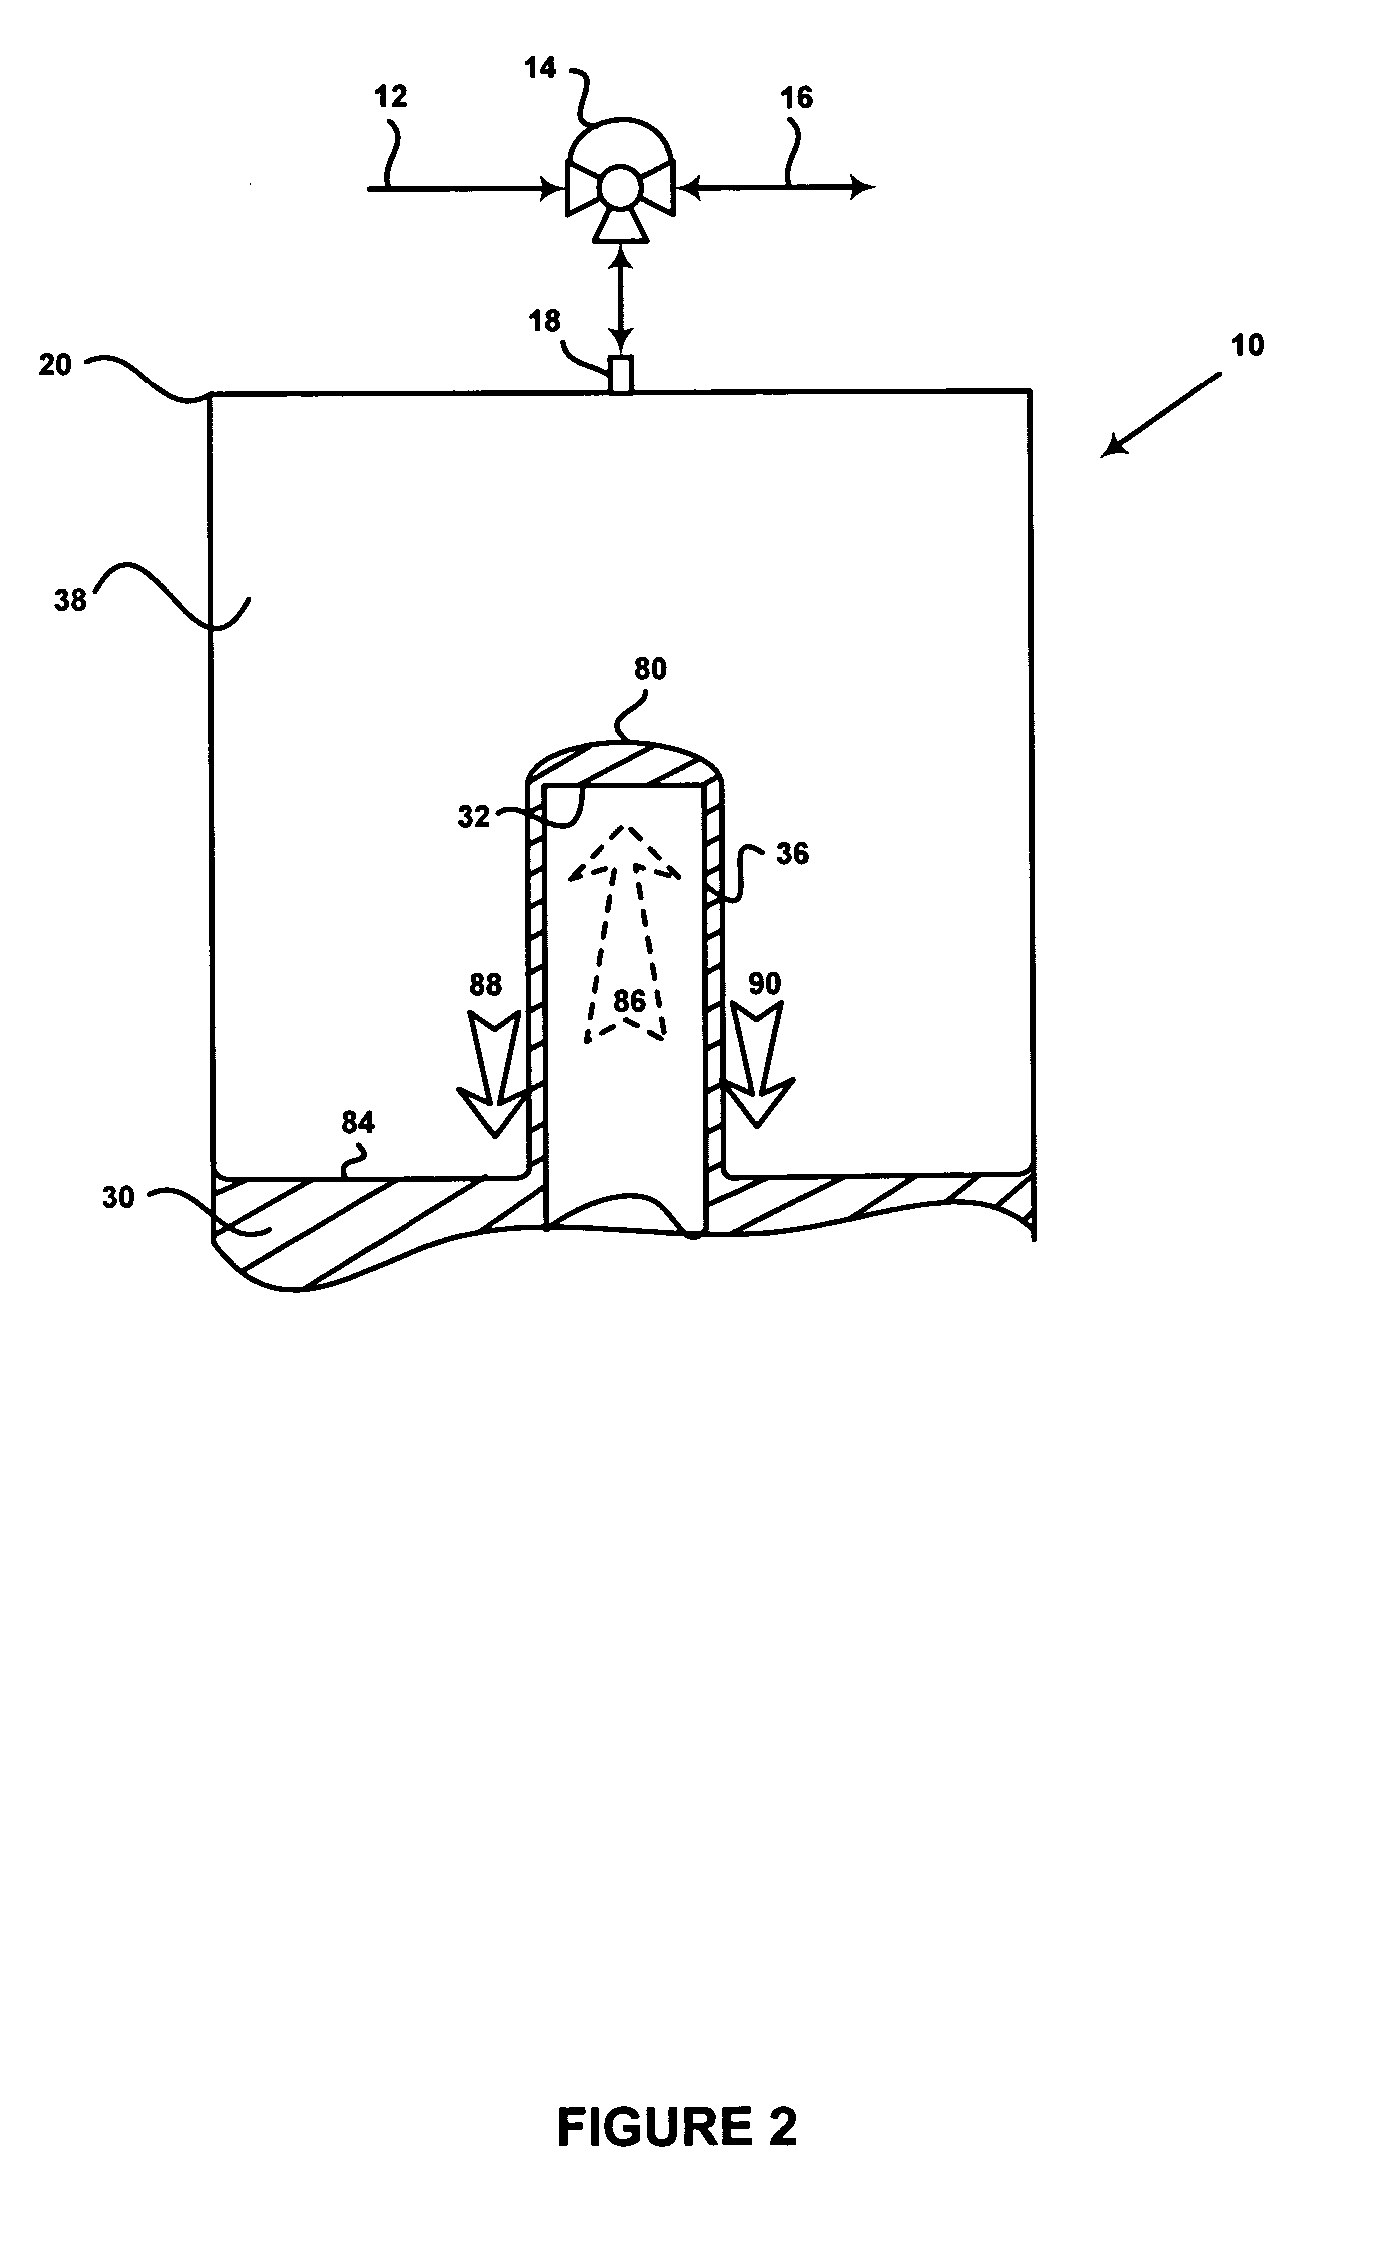 Systems and methods for measurement of low liquid flow rates